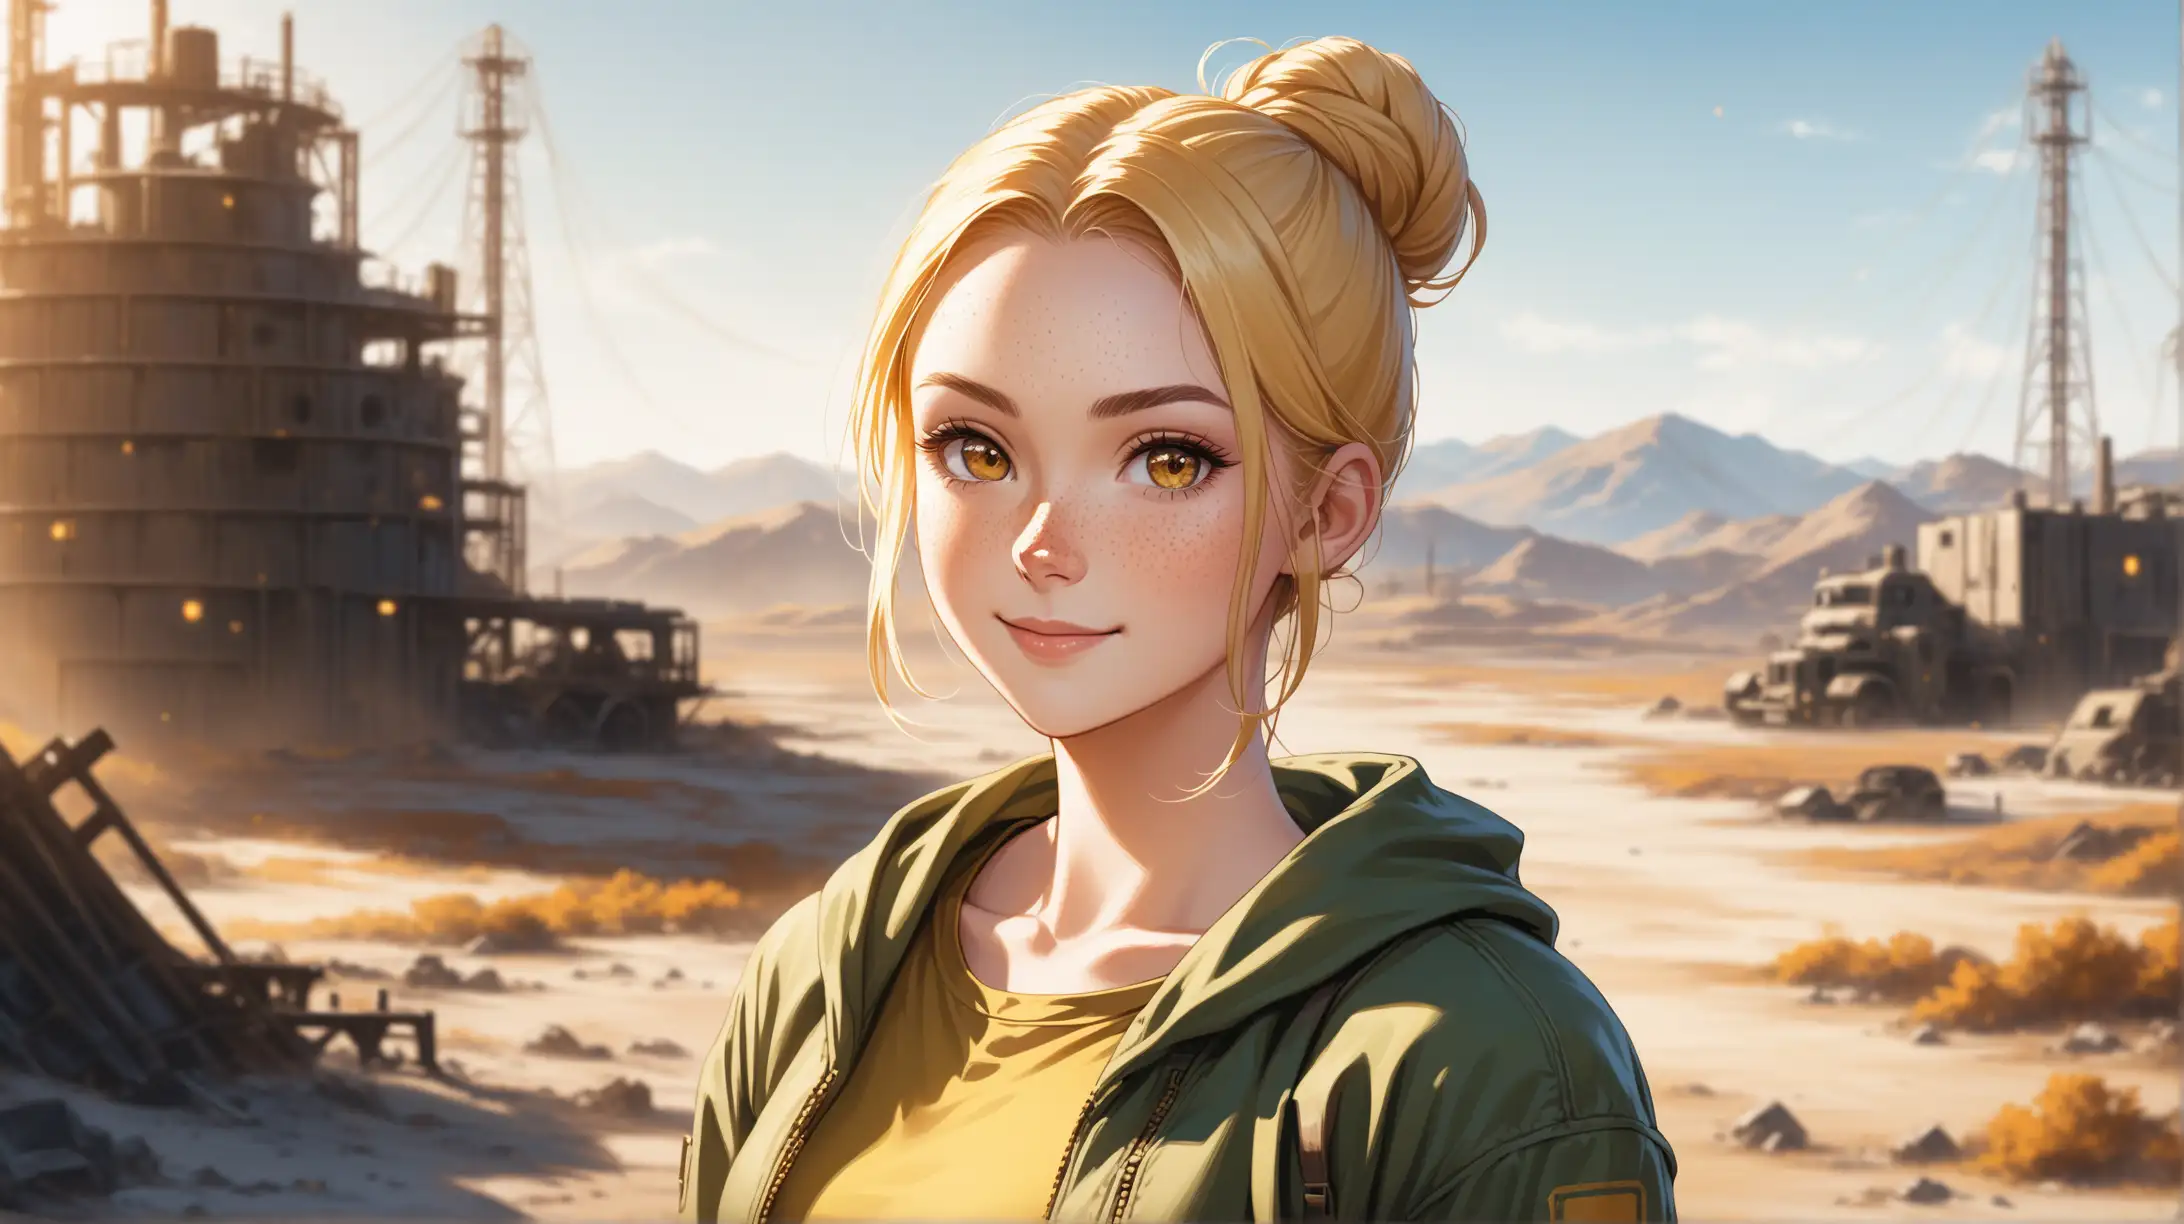 Confident Blonde Woman in FalloutInspired Outfit Smiling Outdoors